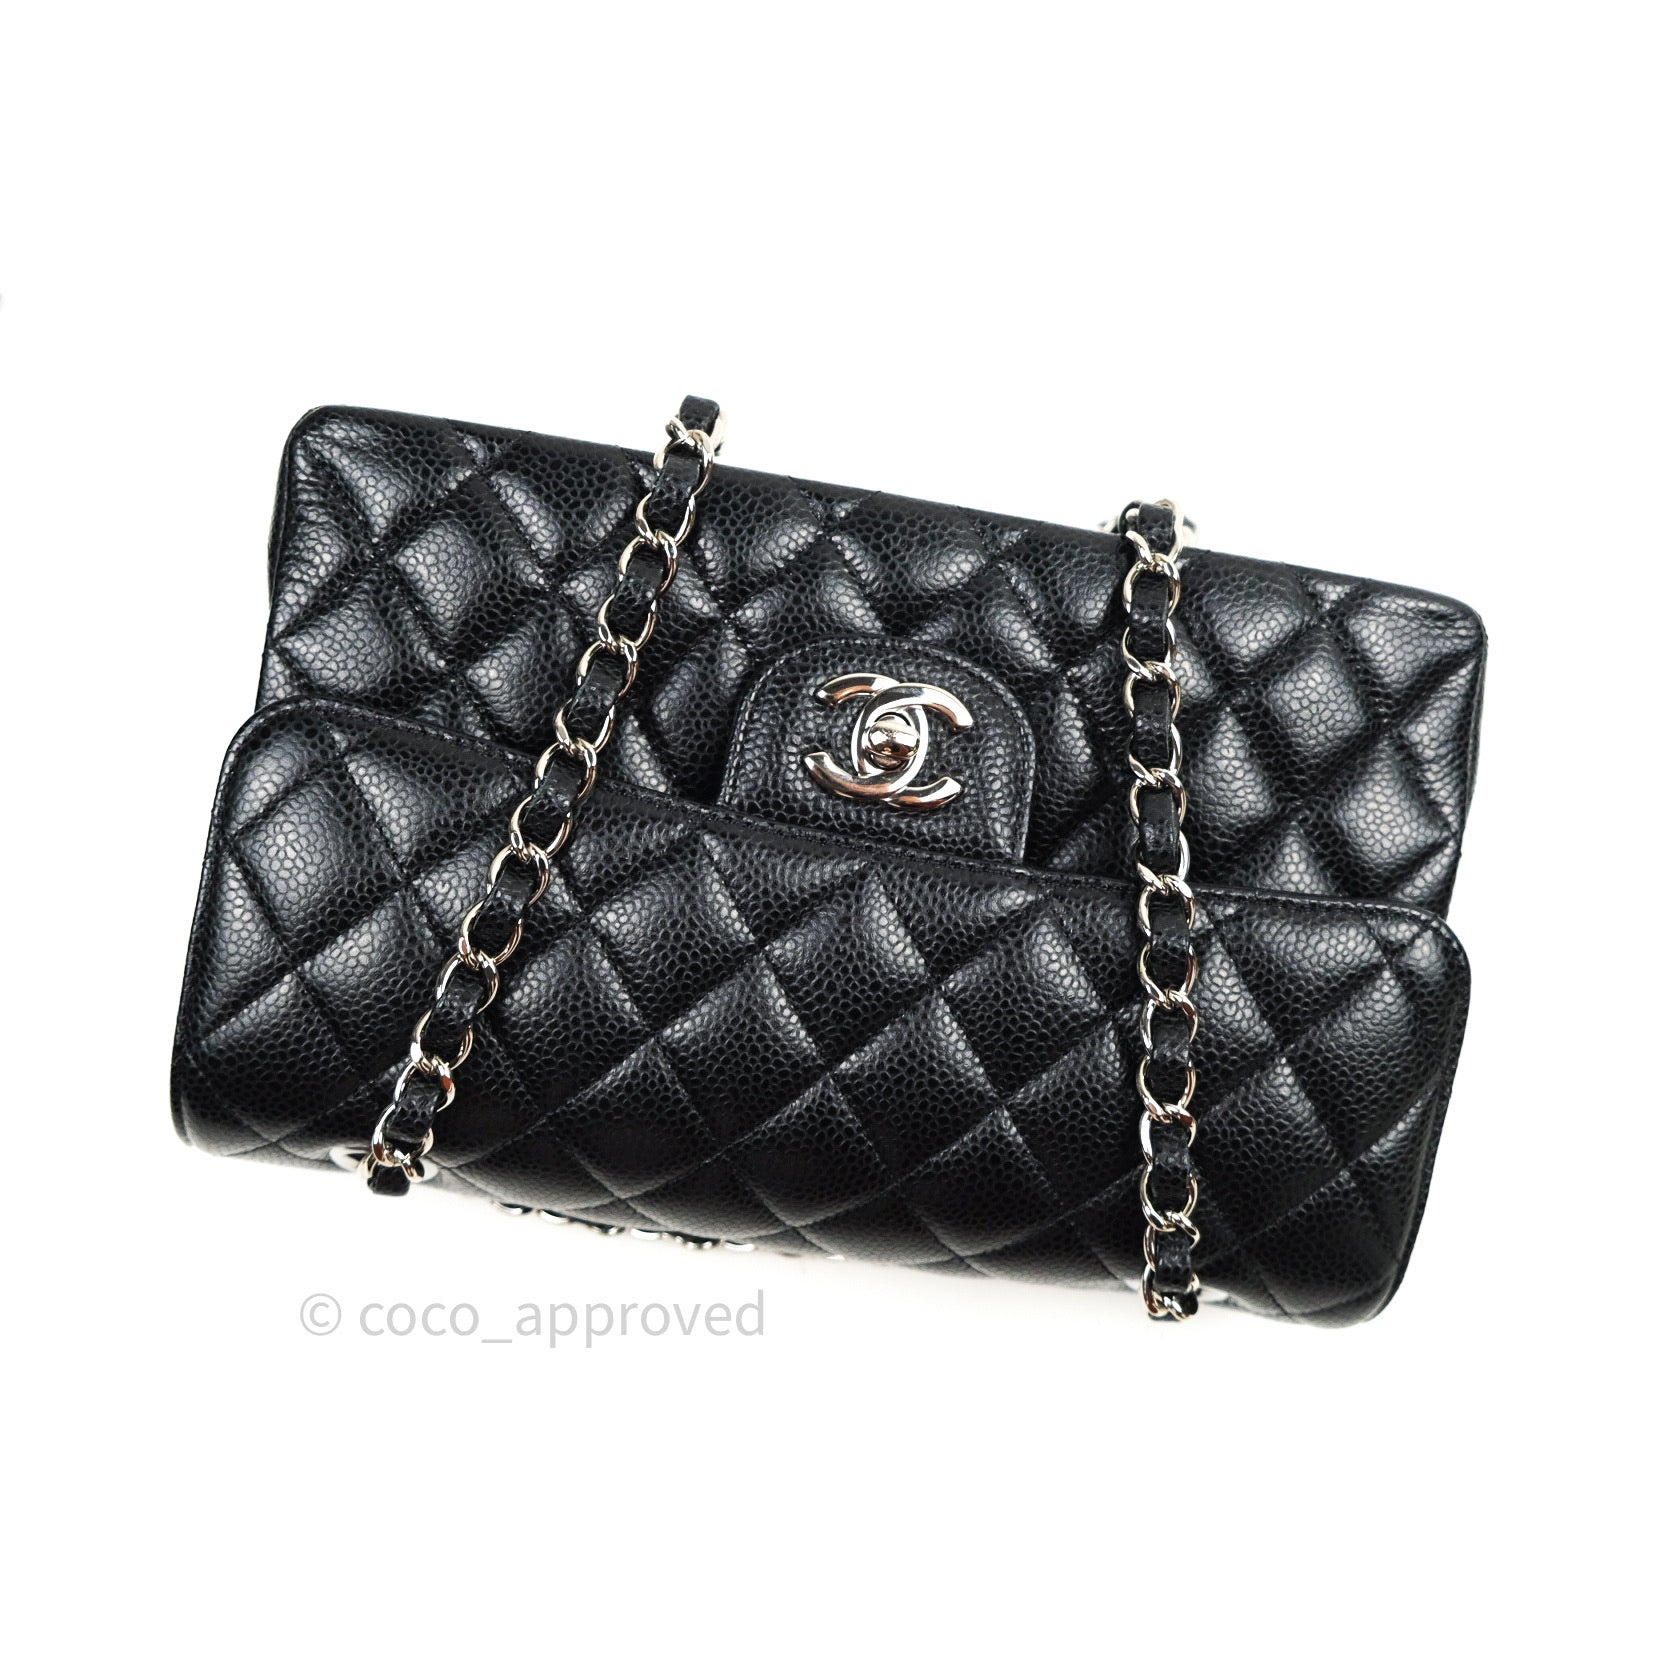 black and silver chanel bag